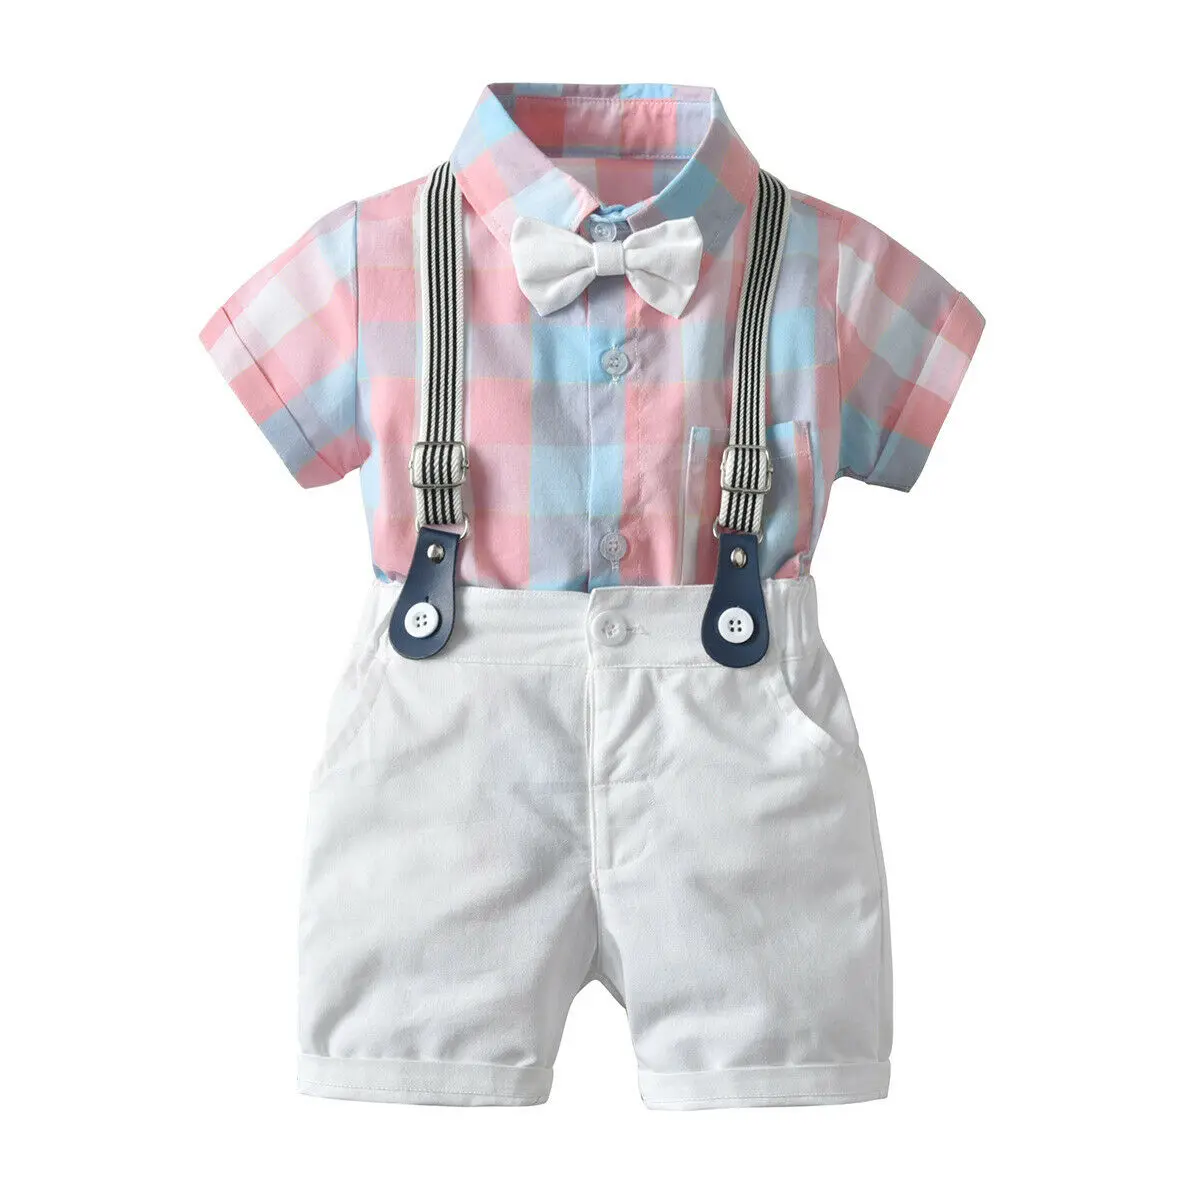 

2021 Baby Summer Clothing Infant Kid Baby Boy Clothes Sets Formal Tuxedo Gentleman Suit Plaid Romper Overall Pants Outfits 6M-4T